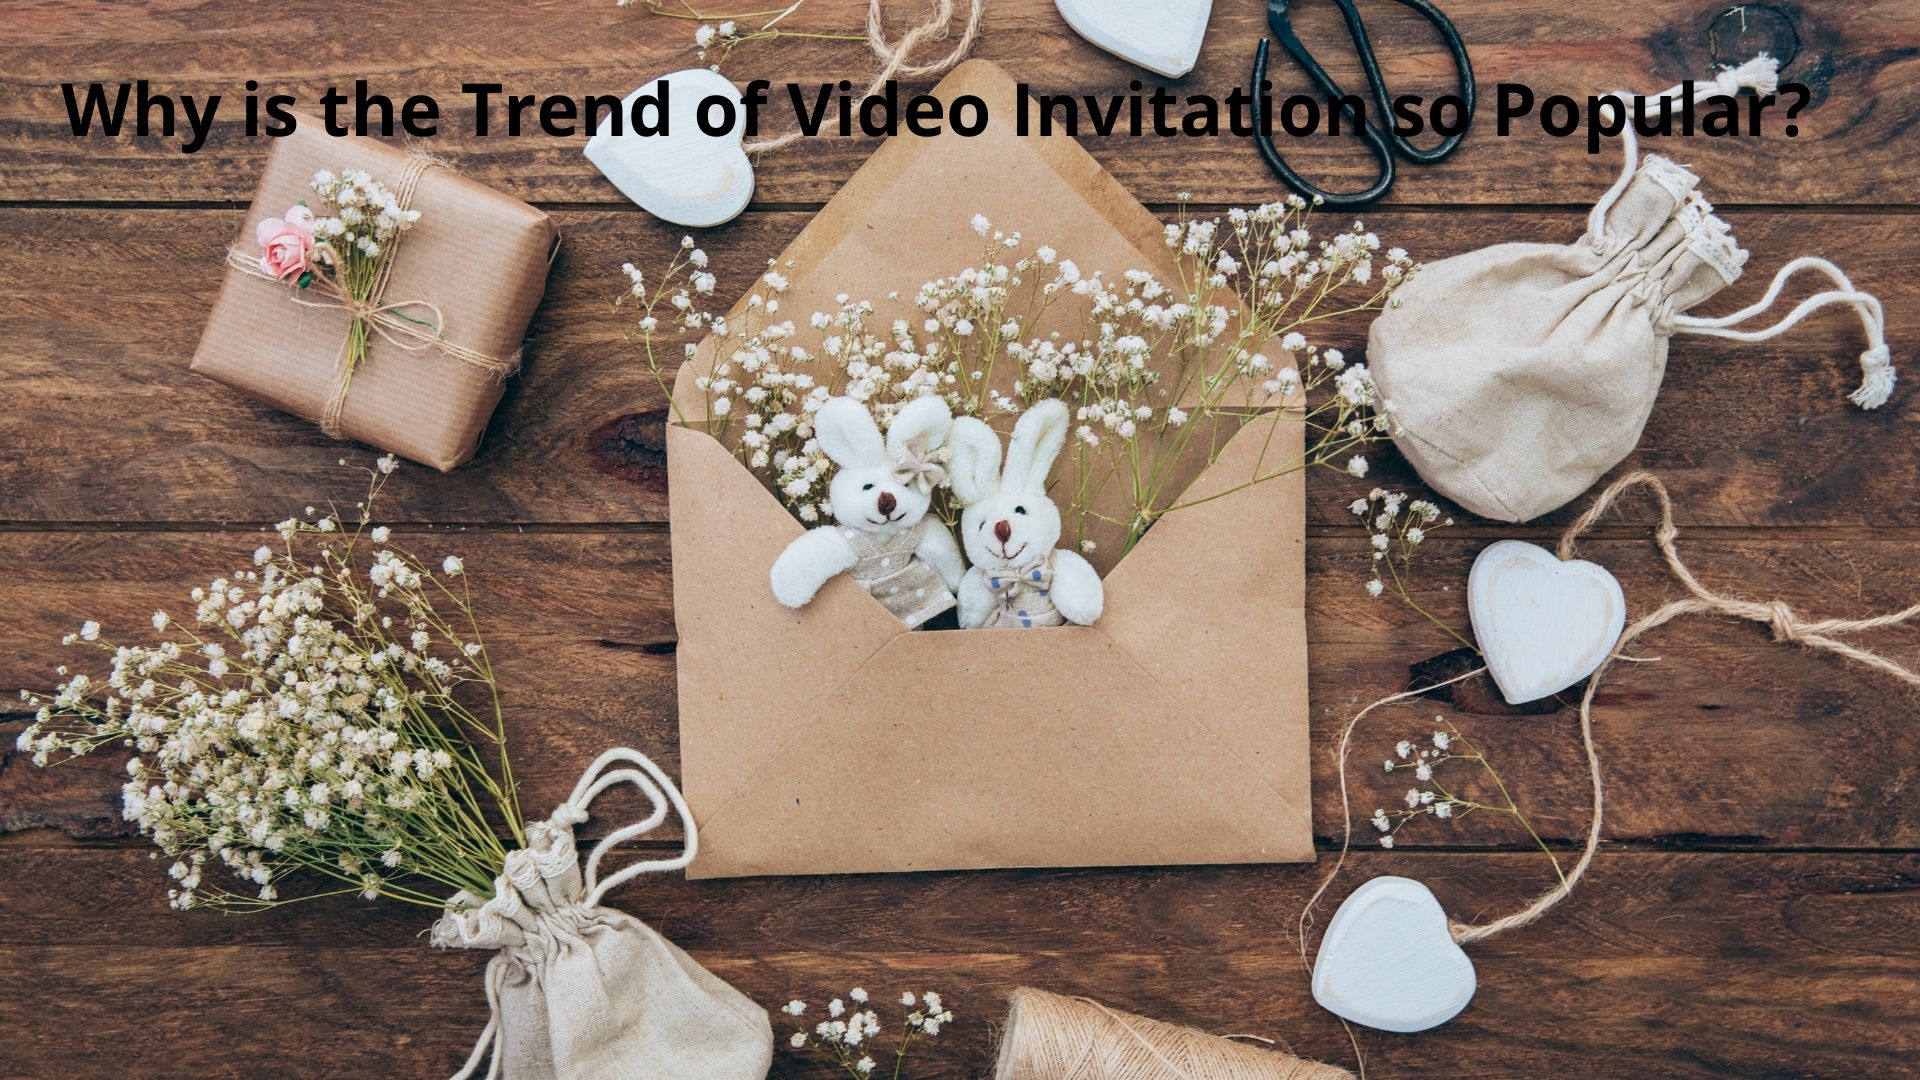 Why is the Trend of Video Invitation so Popular?